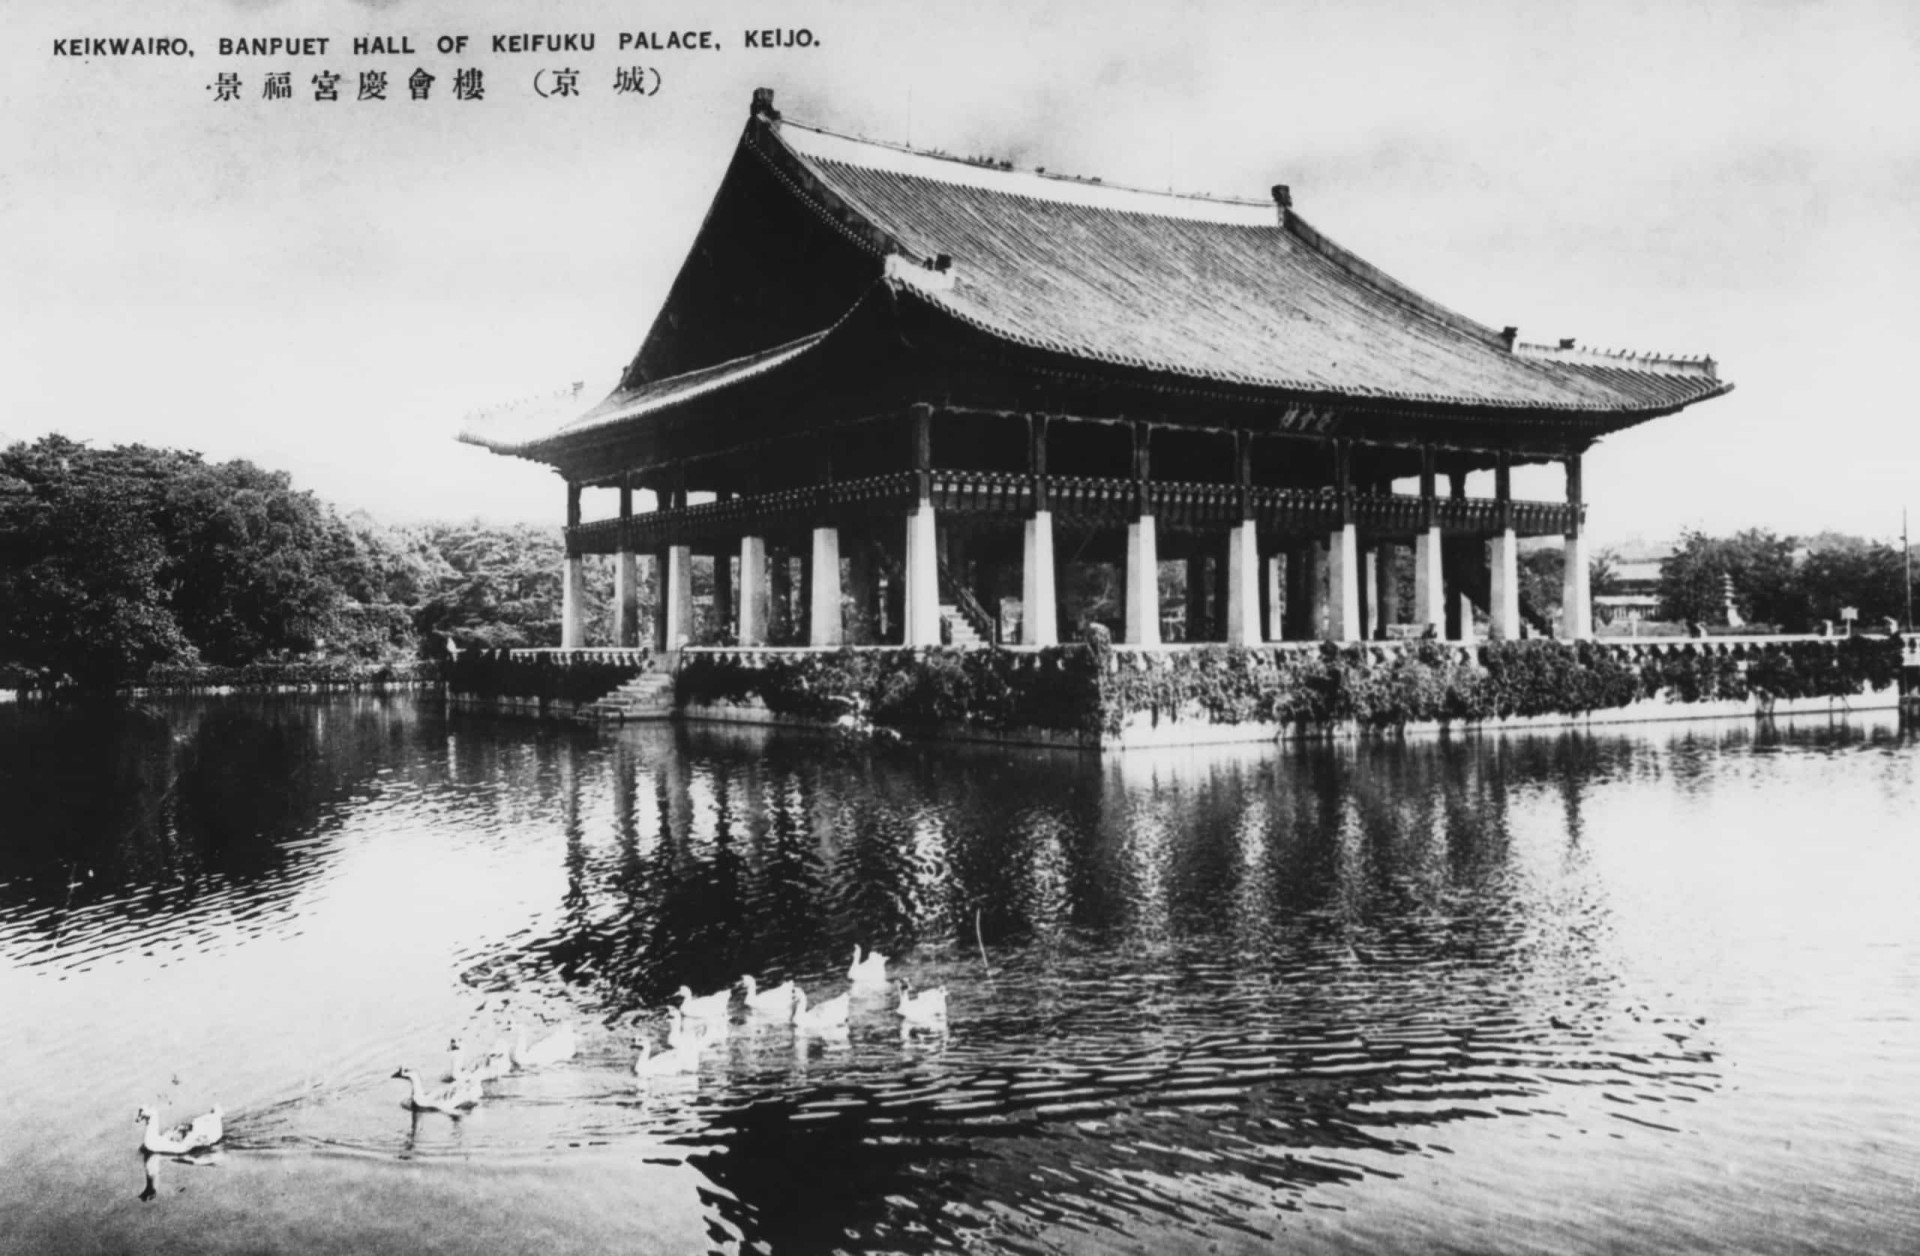 A picture of Gyeonghoeru, a key part of the Gyeongbokgung Palace complex located in Seoul. This photo was taken around 1900.<p>You may also like:<a href="https://www.starsinsider.com/n/362370?utm_source=msn.com&utm_medium=display&utm_campaign=referral_description&utm_content=397441v1en-en"> Ridiculously extravagant celebrity gift exchanges </a></p>